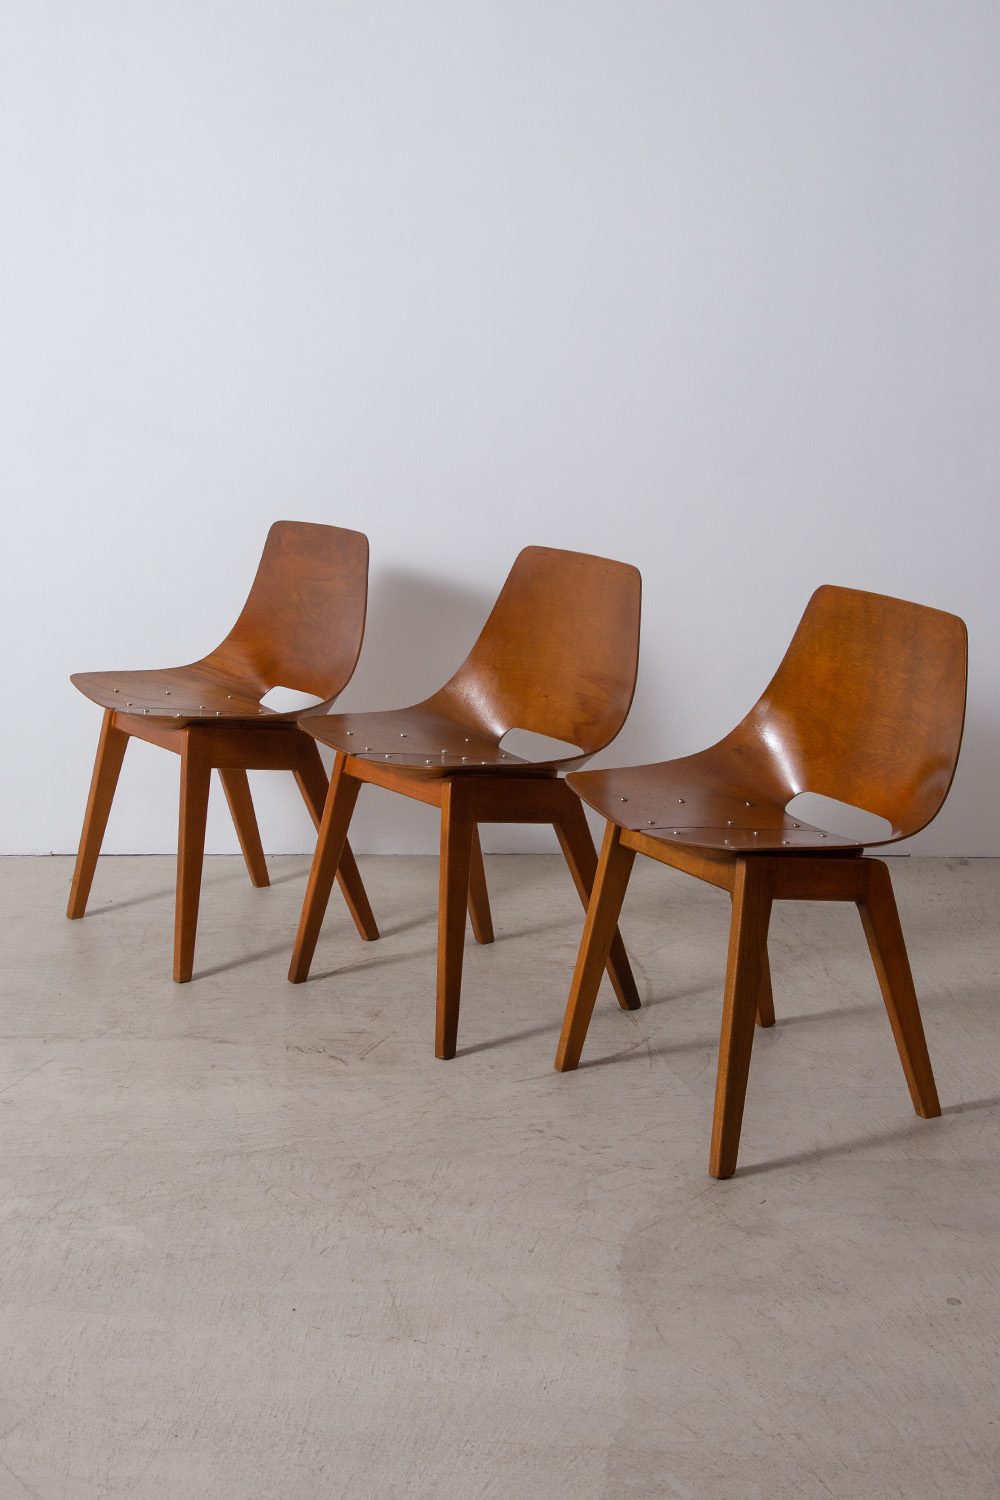 stoop | Amsterdam Chair for Steiner by A.R.P = Pierre Guariche